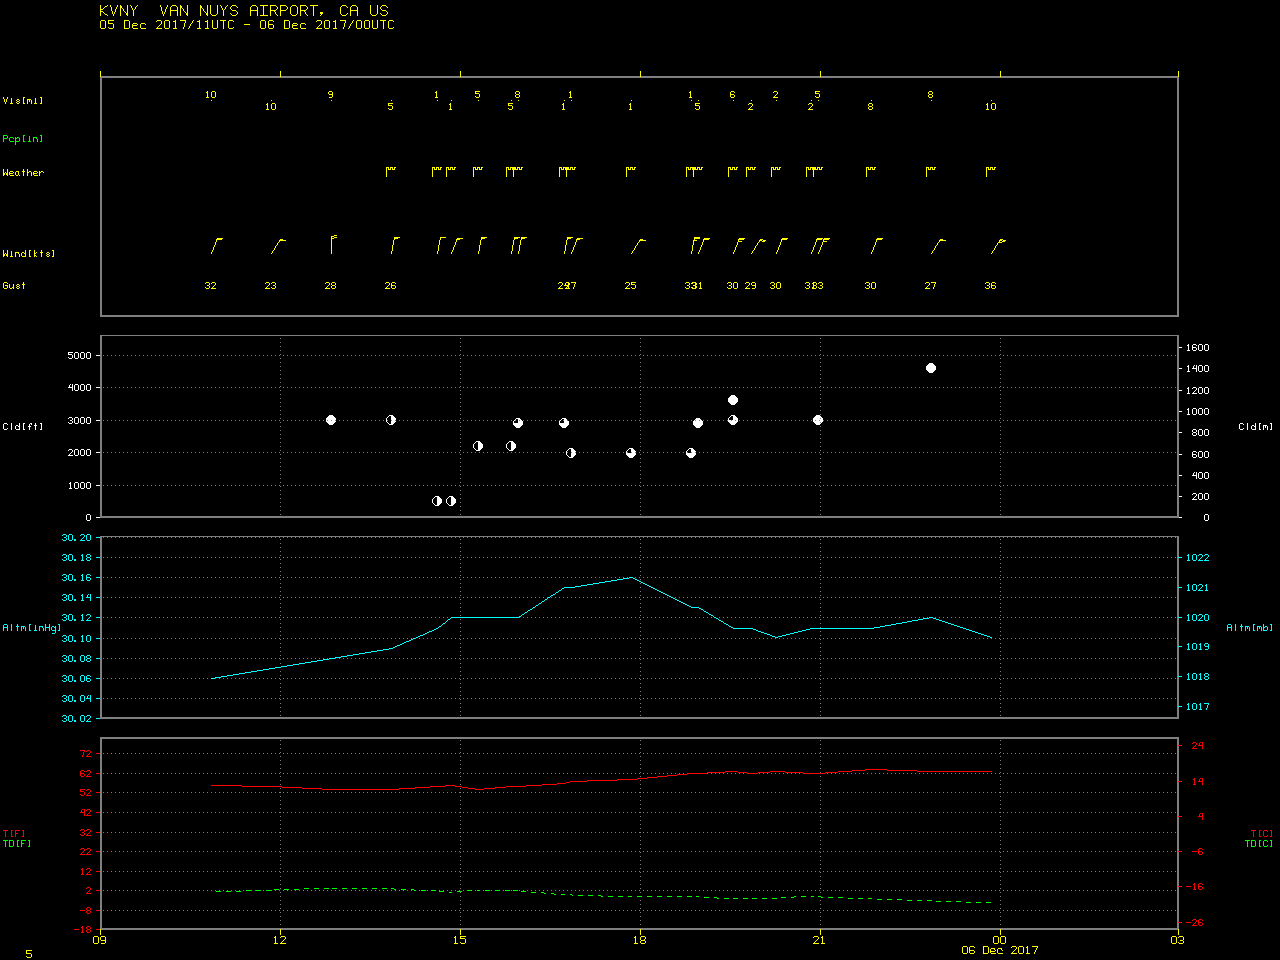 Time series plot of surface reports at Van Nuys, California [click to enlarge]